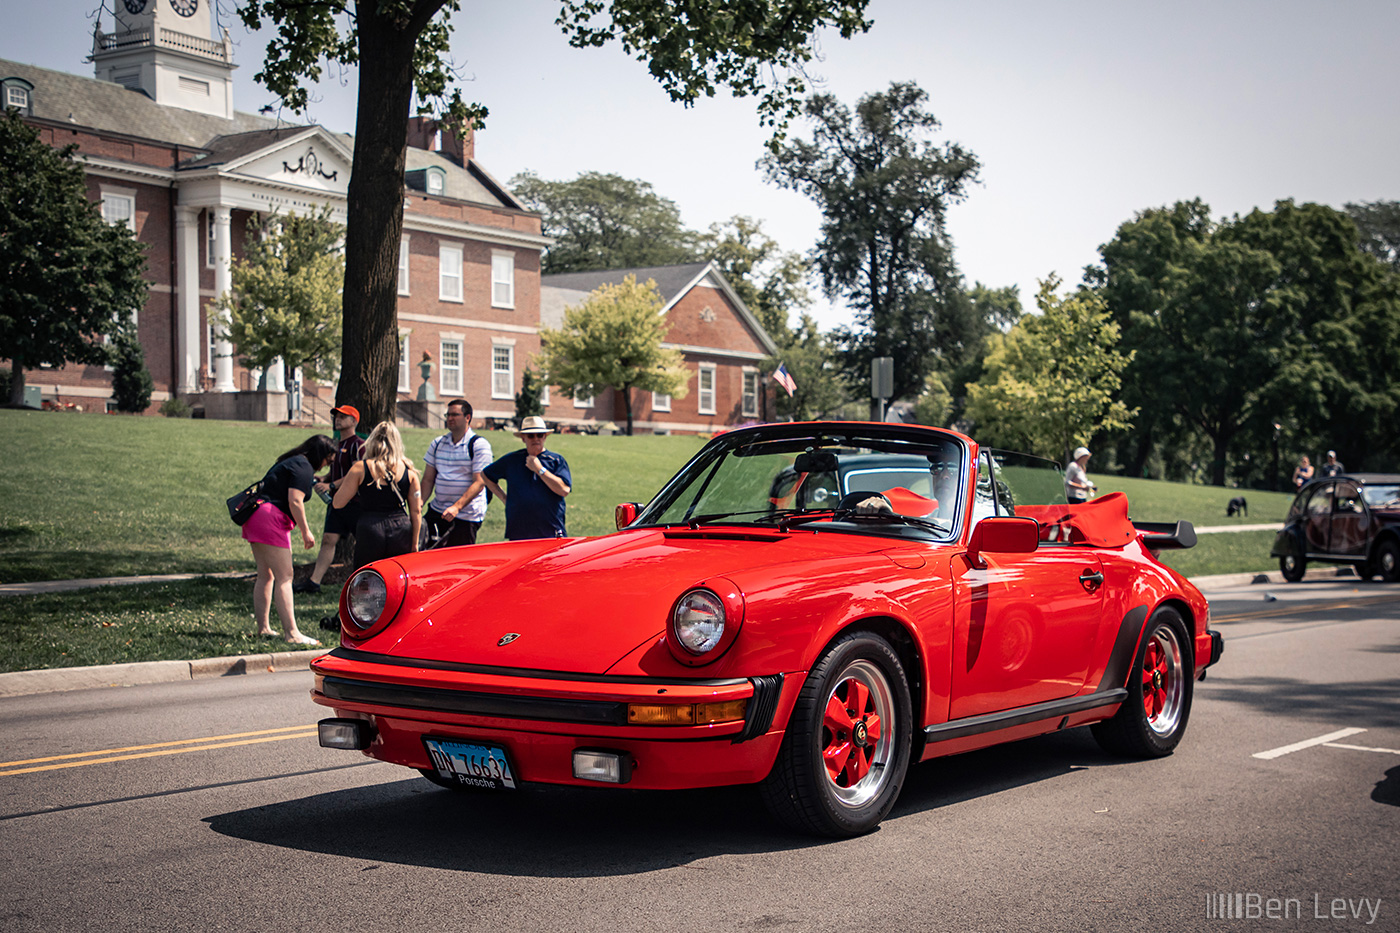 Red Porsche 911 SC Cabriolet at Hinsdale Cars and Coffee